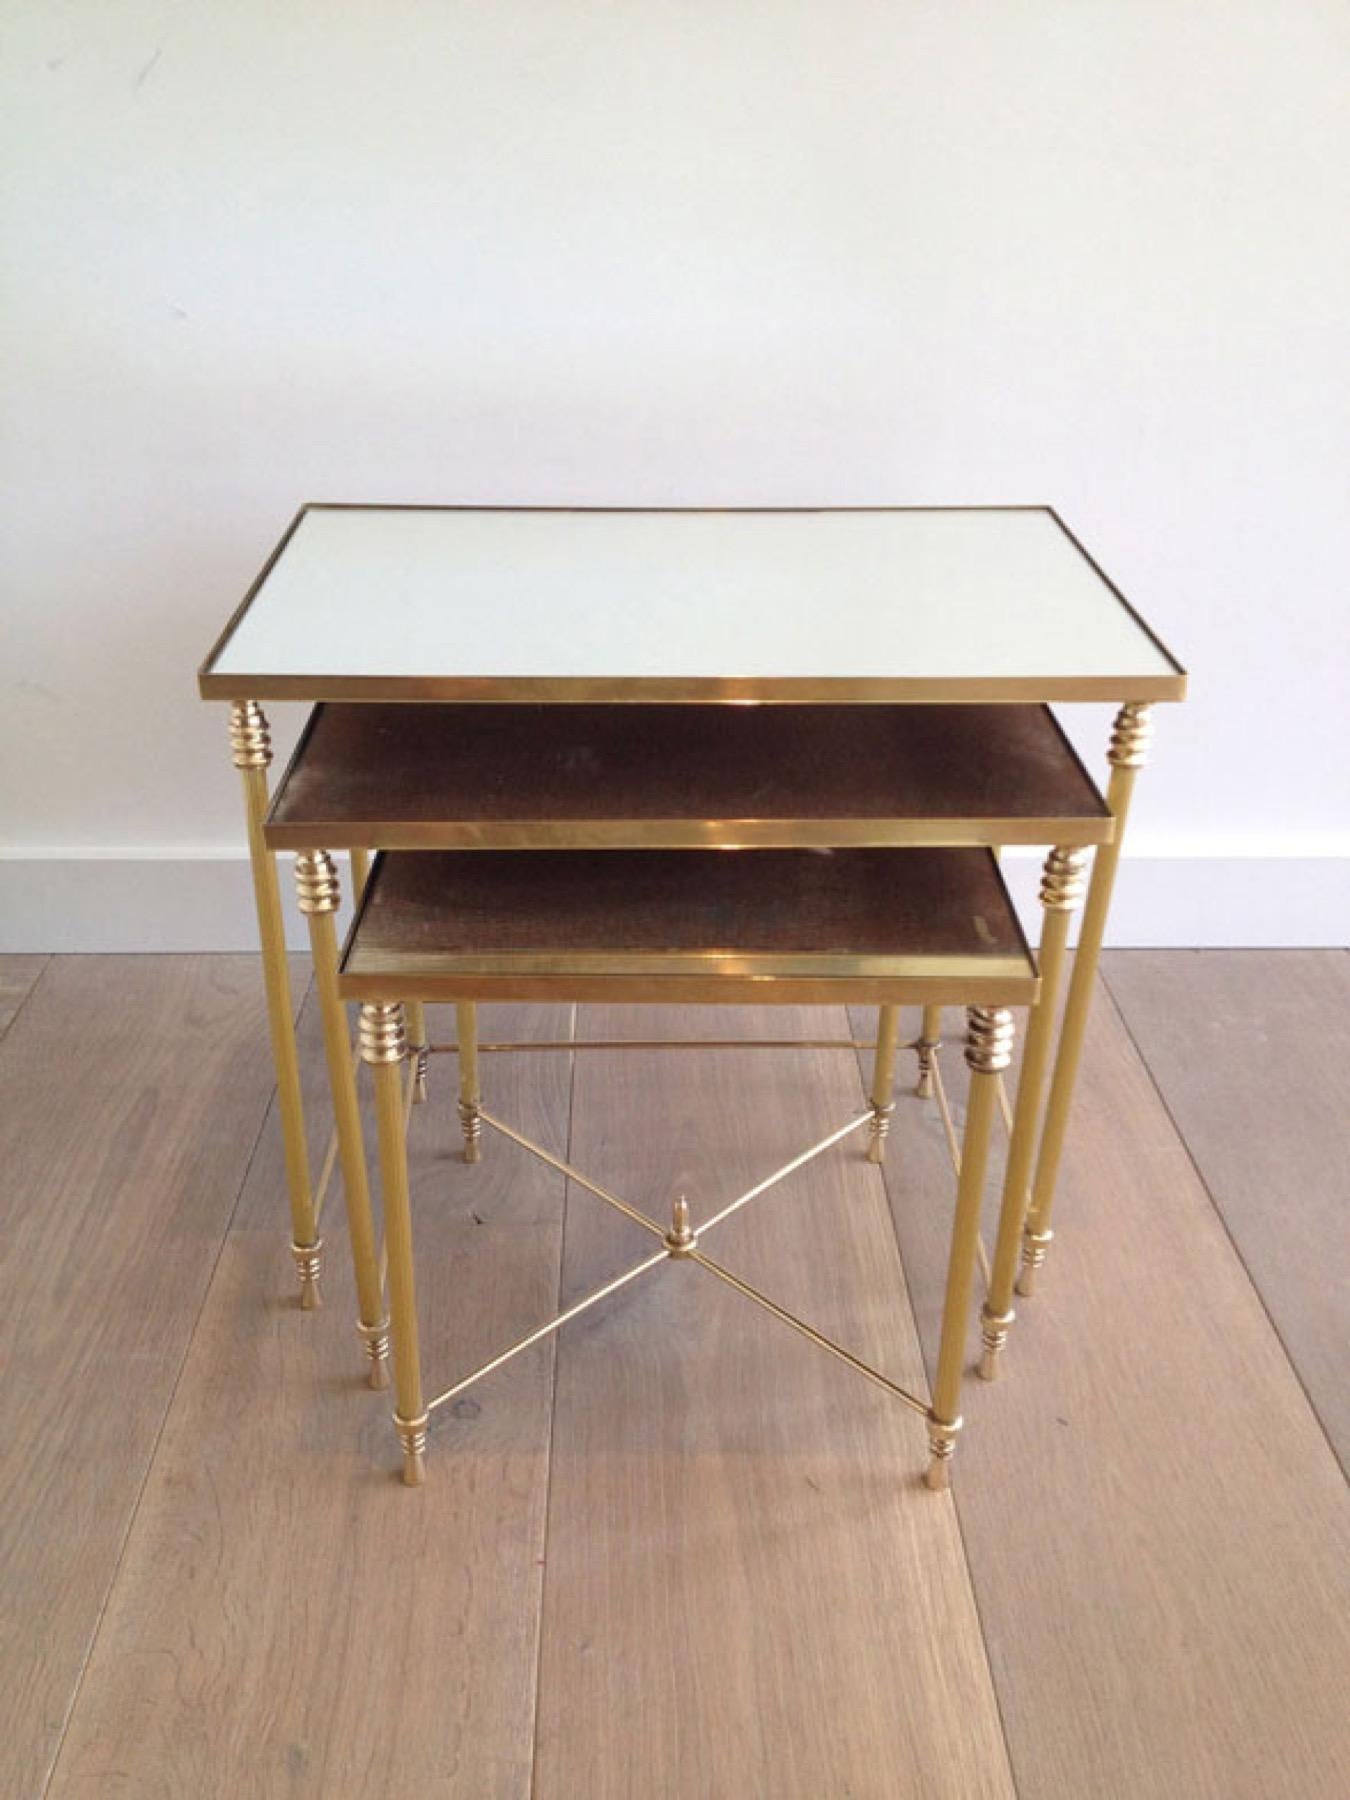 This nice set of 3 neoclassical style nesting tables is made of brass with mirror tops. This is a French work, in the style of famous designer Maison Jansen. Circa 1940.